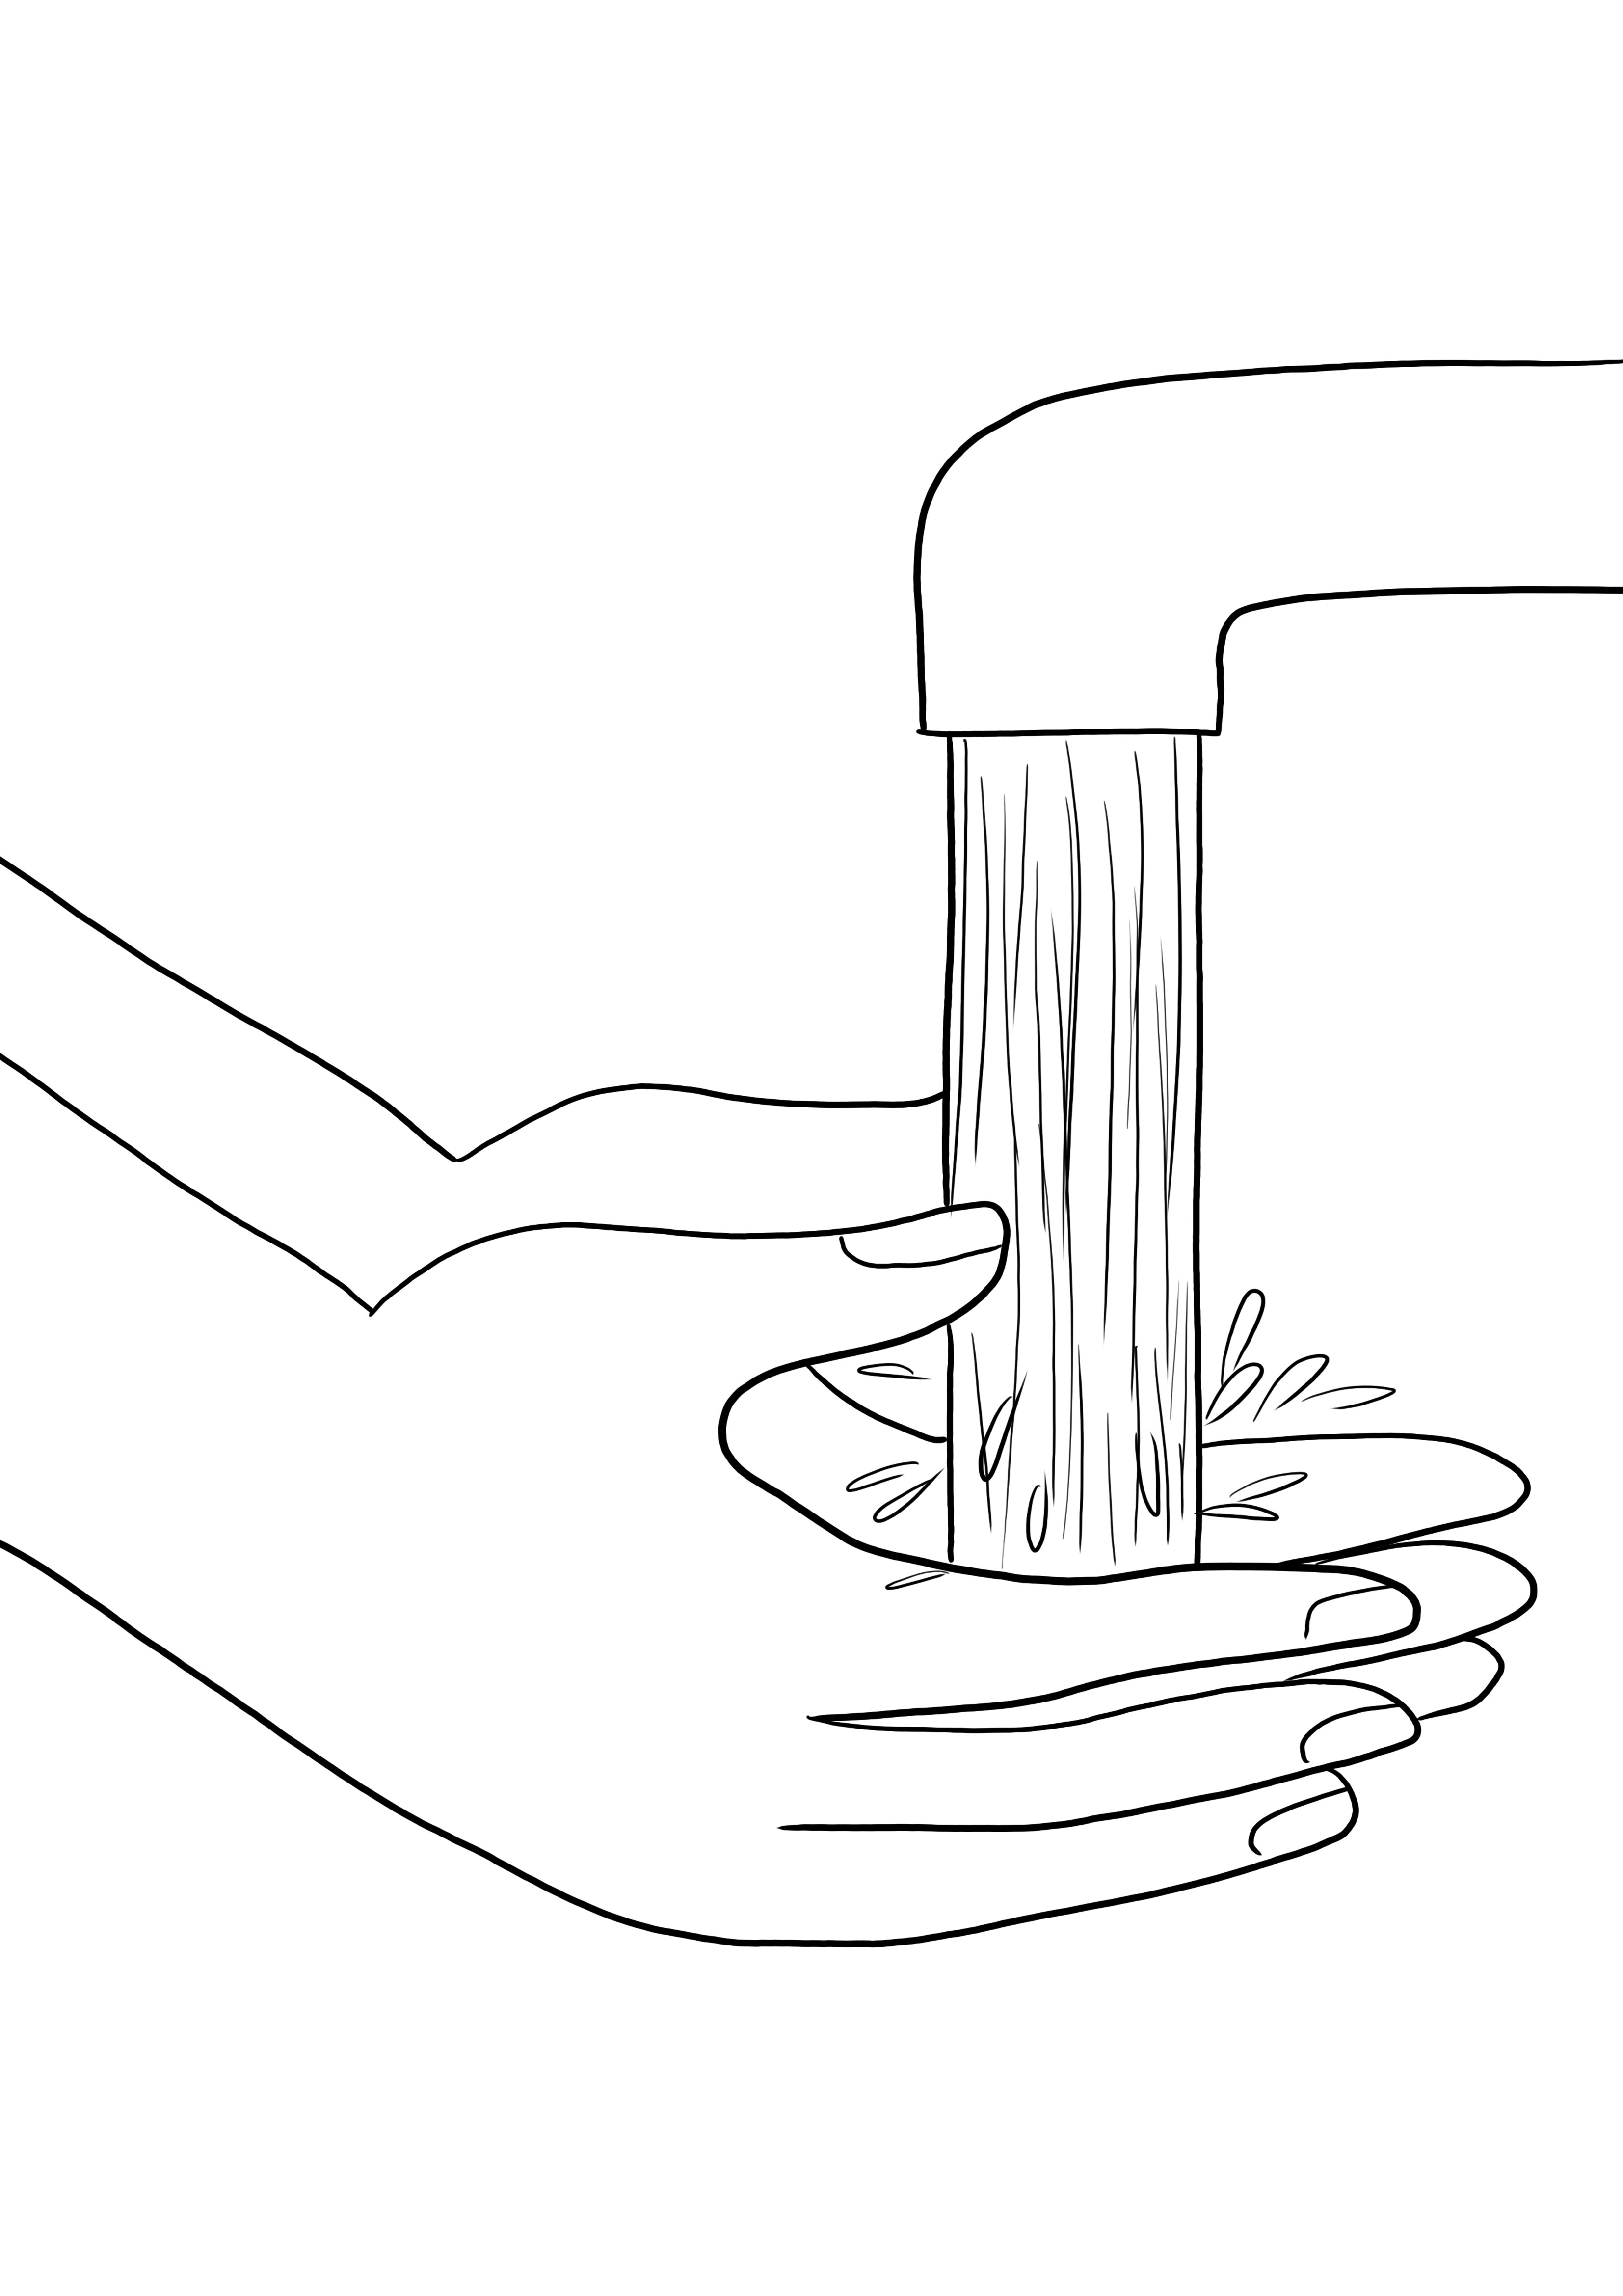 Simple Hand Washing coloring and free printing image-great way to learn about hygiene